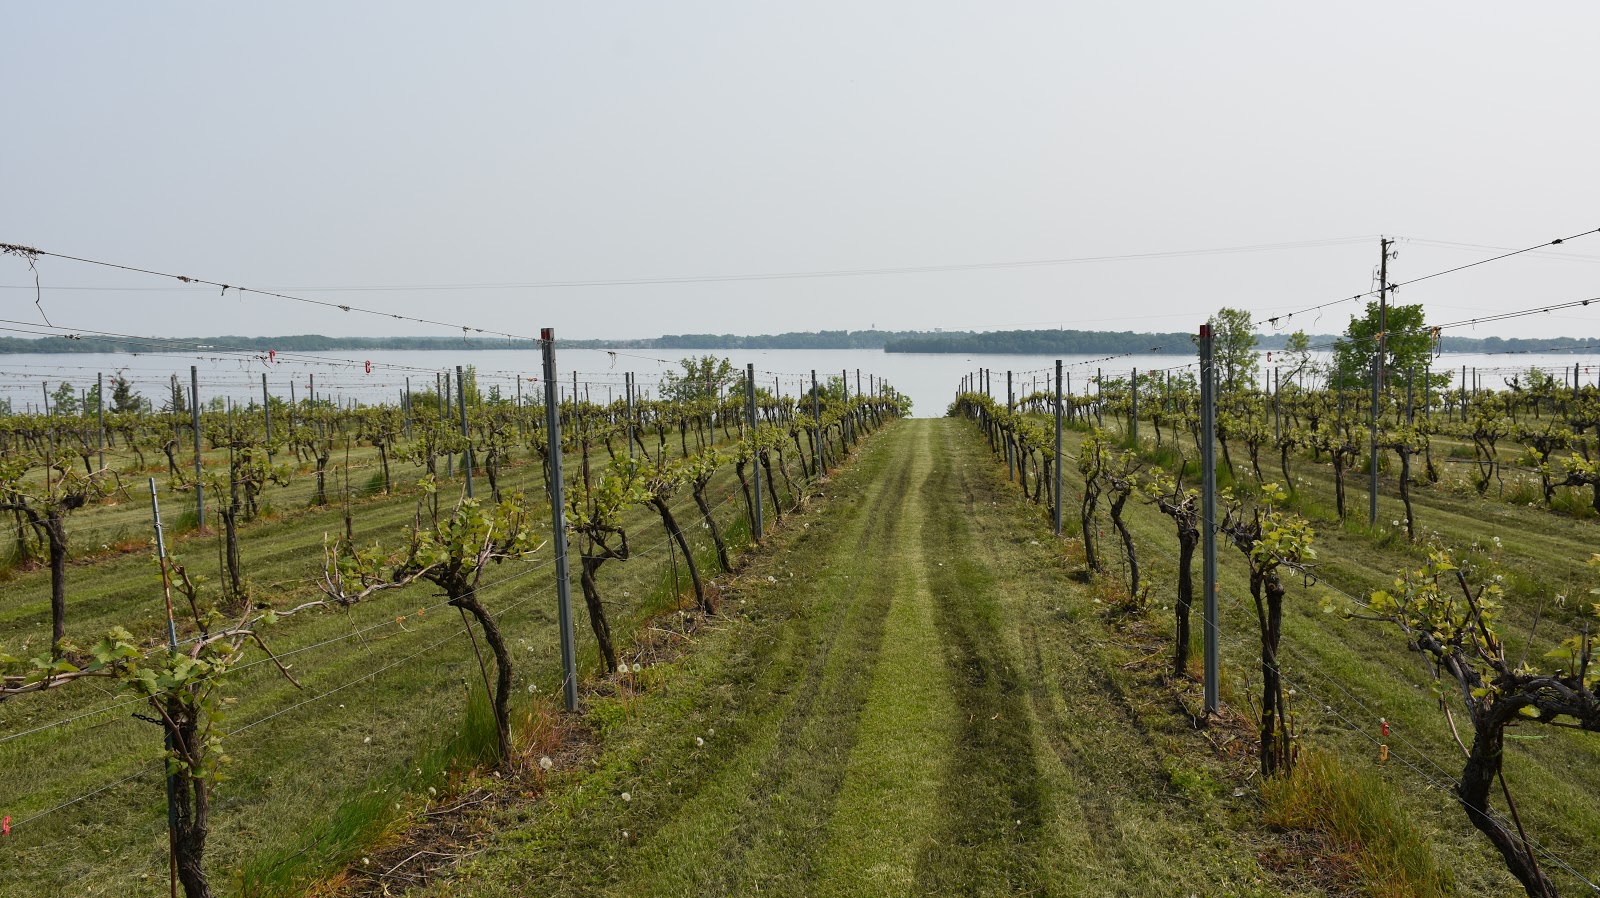 Sovereign Estate's vineyard overlooking a lake